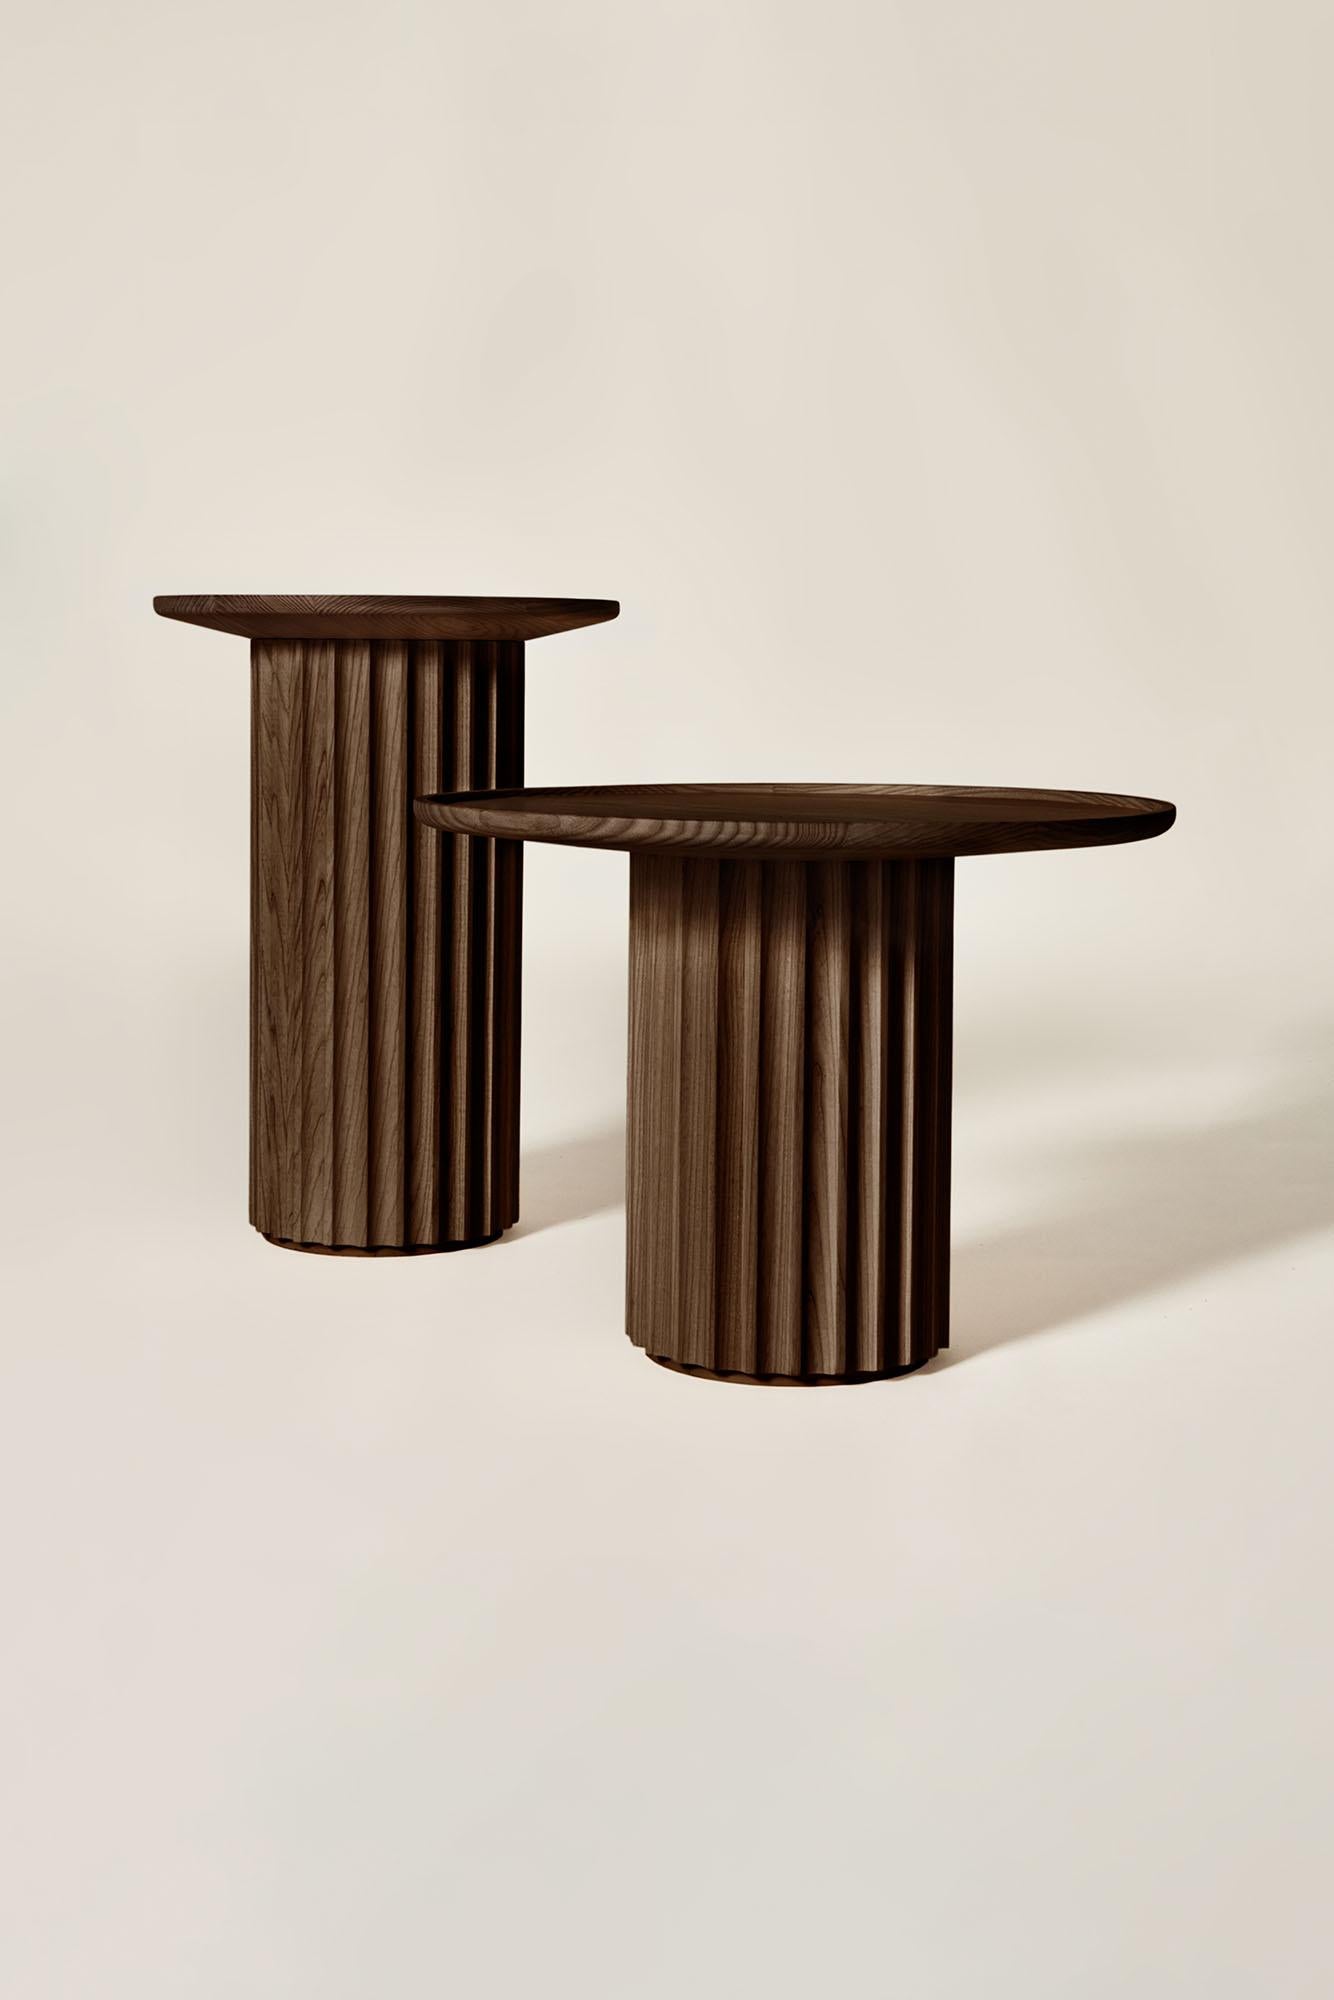 Capitello coffee table is part of our 2023 collection in collaboration with Cono Studio. Dale Italia’s craftsmanship takes on a new prospective and language, creating a contemporary and stylish design.

These coffee tables present elementary